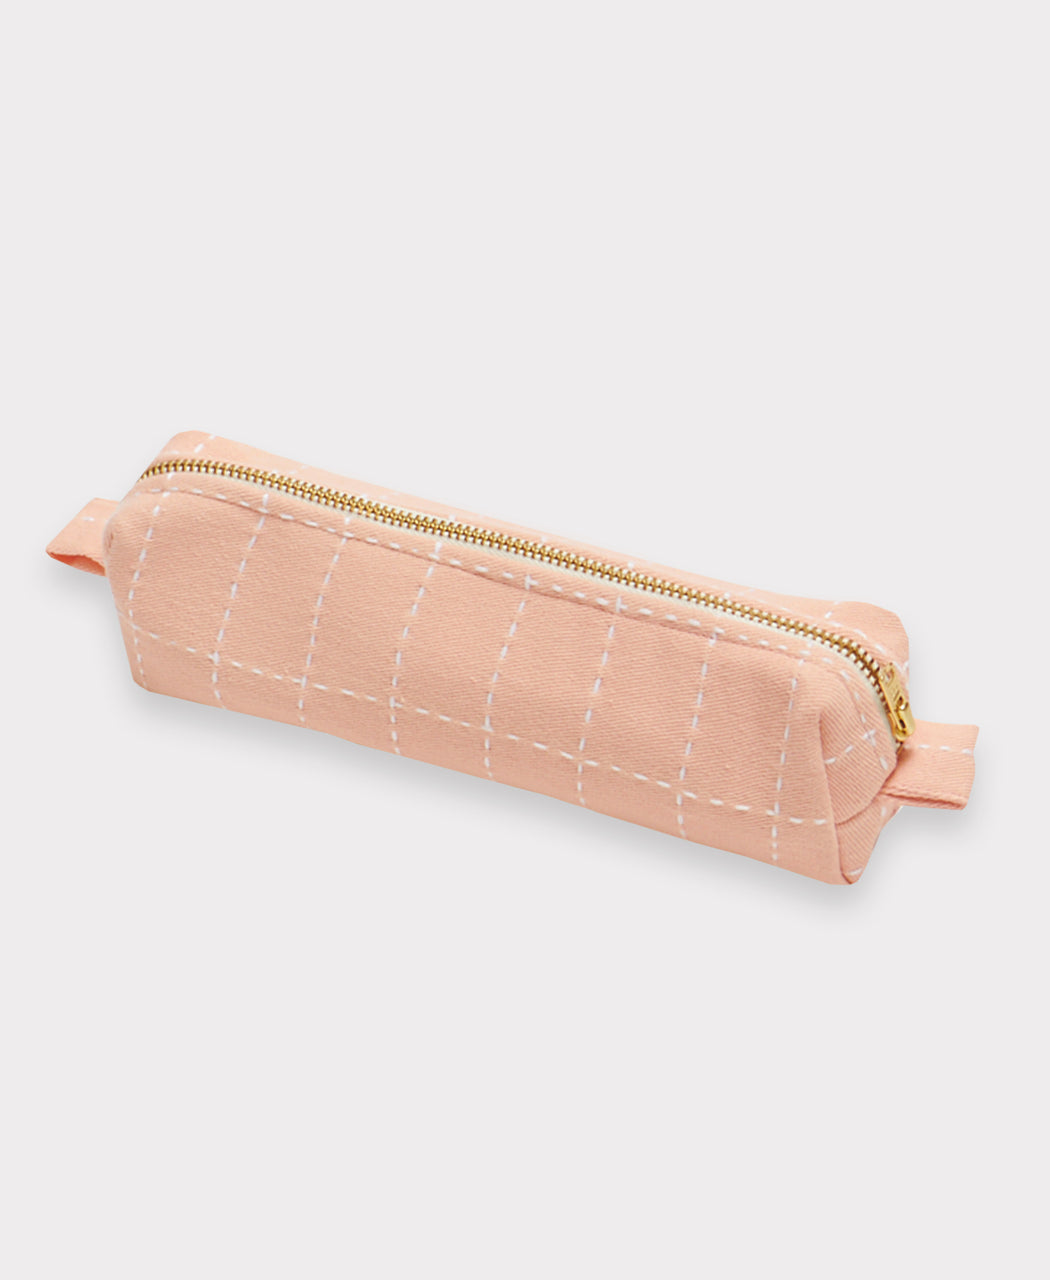 https://anchalproject.org/cdn/shop/products/small-grid-stitch-toiletry-bag-blush-front-2_1050x1281.jpg?v=1695392223